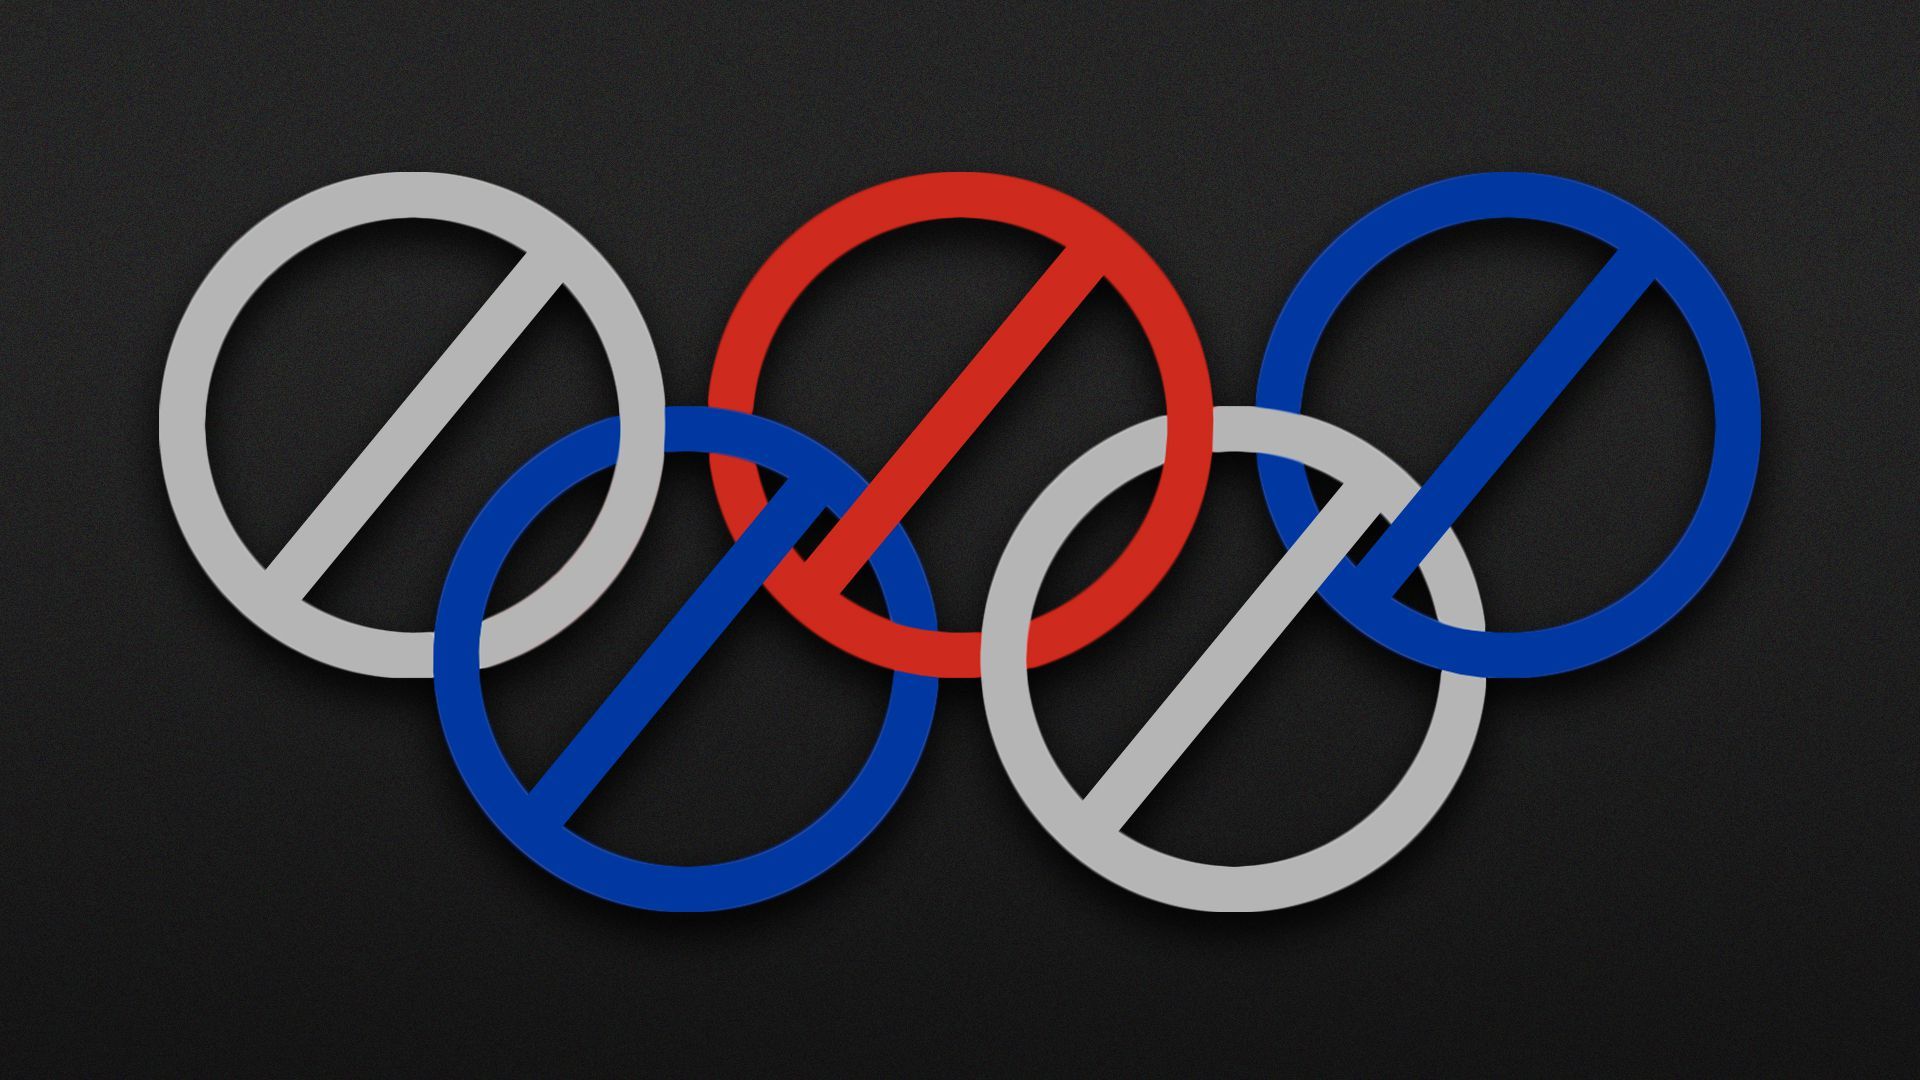 Illustration of the Olympic rings design with Russian flag colors and with X bars through each ring